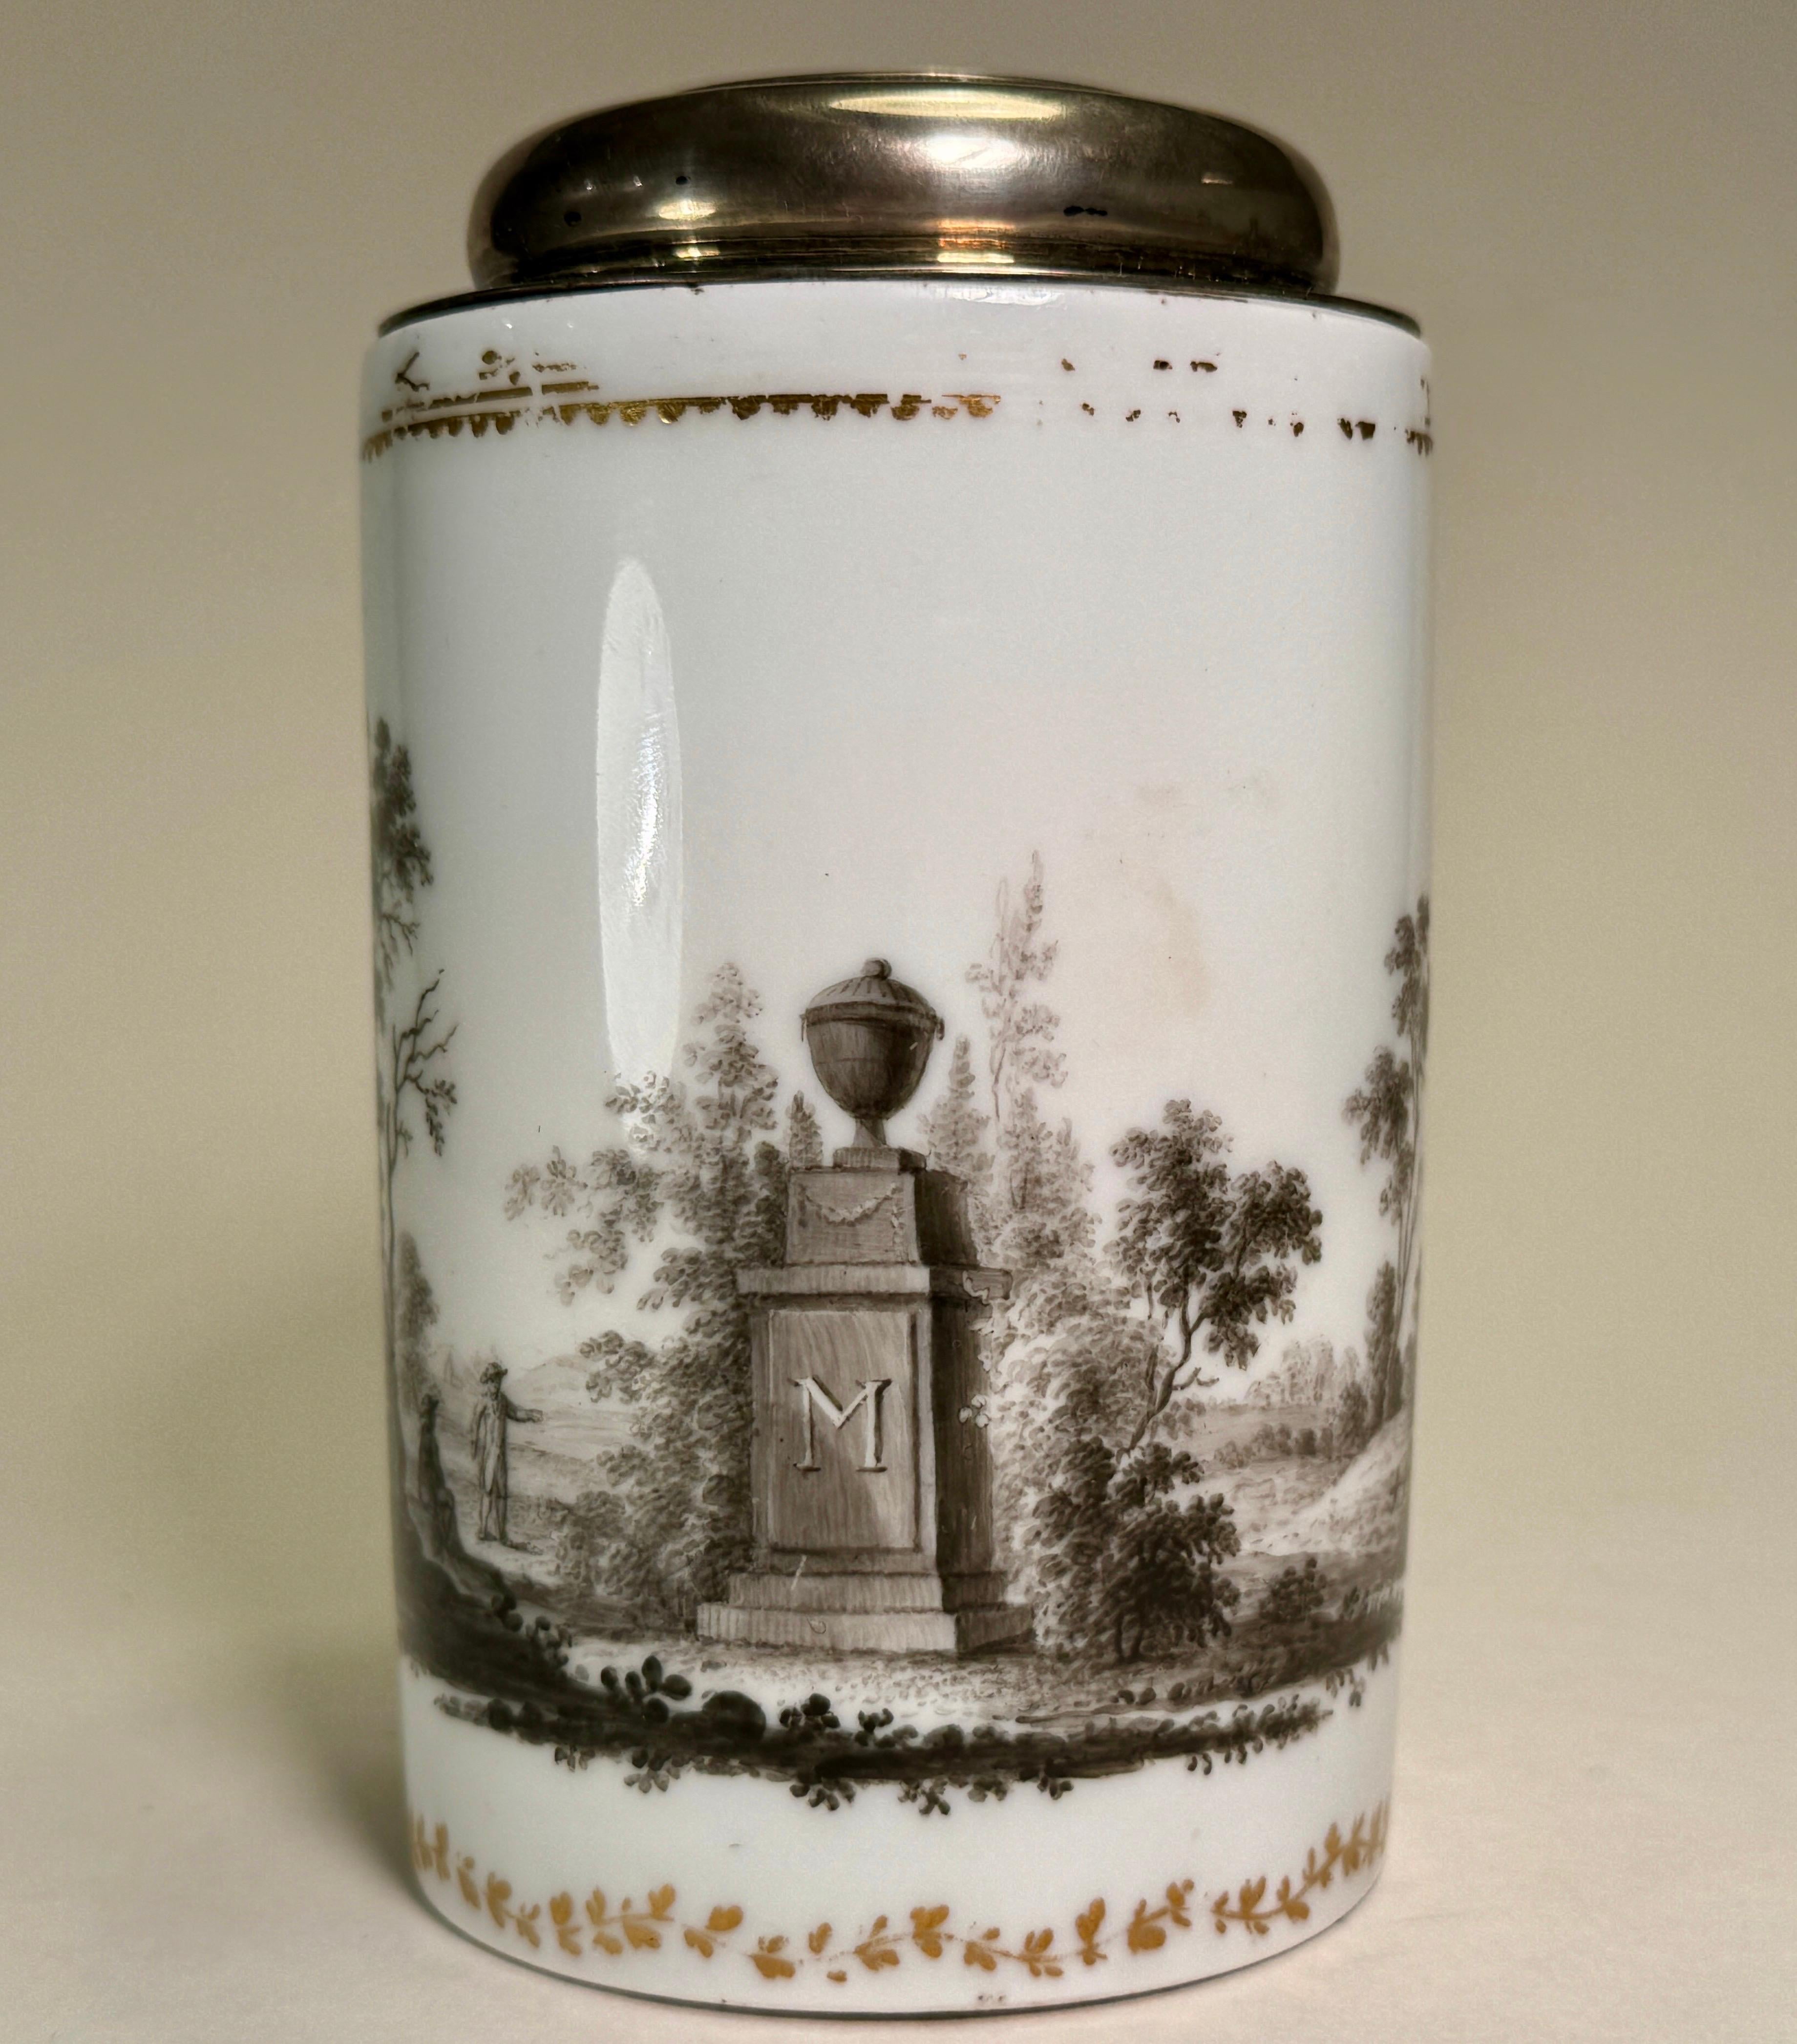 19th Century Royal Copenhagen Porcelain Jug with Silver Gilt Lid, Denmark In Good Condition For Sale In Haddonfield, NJ